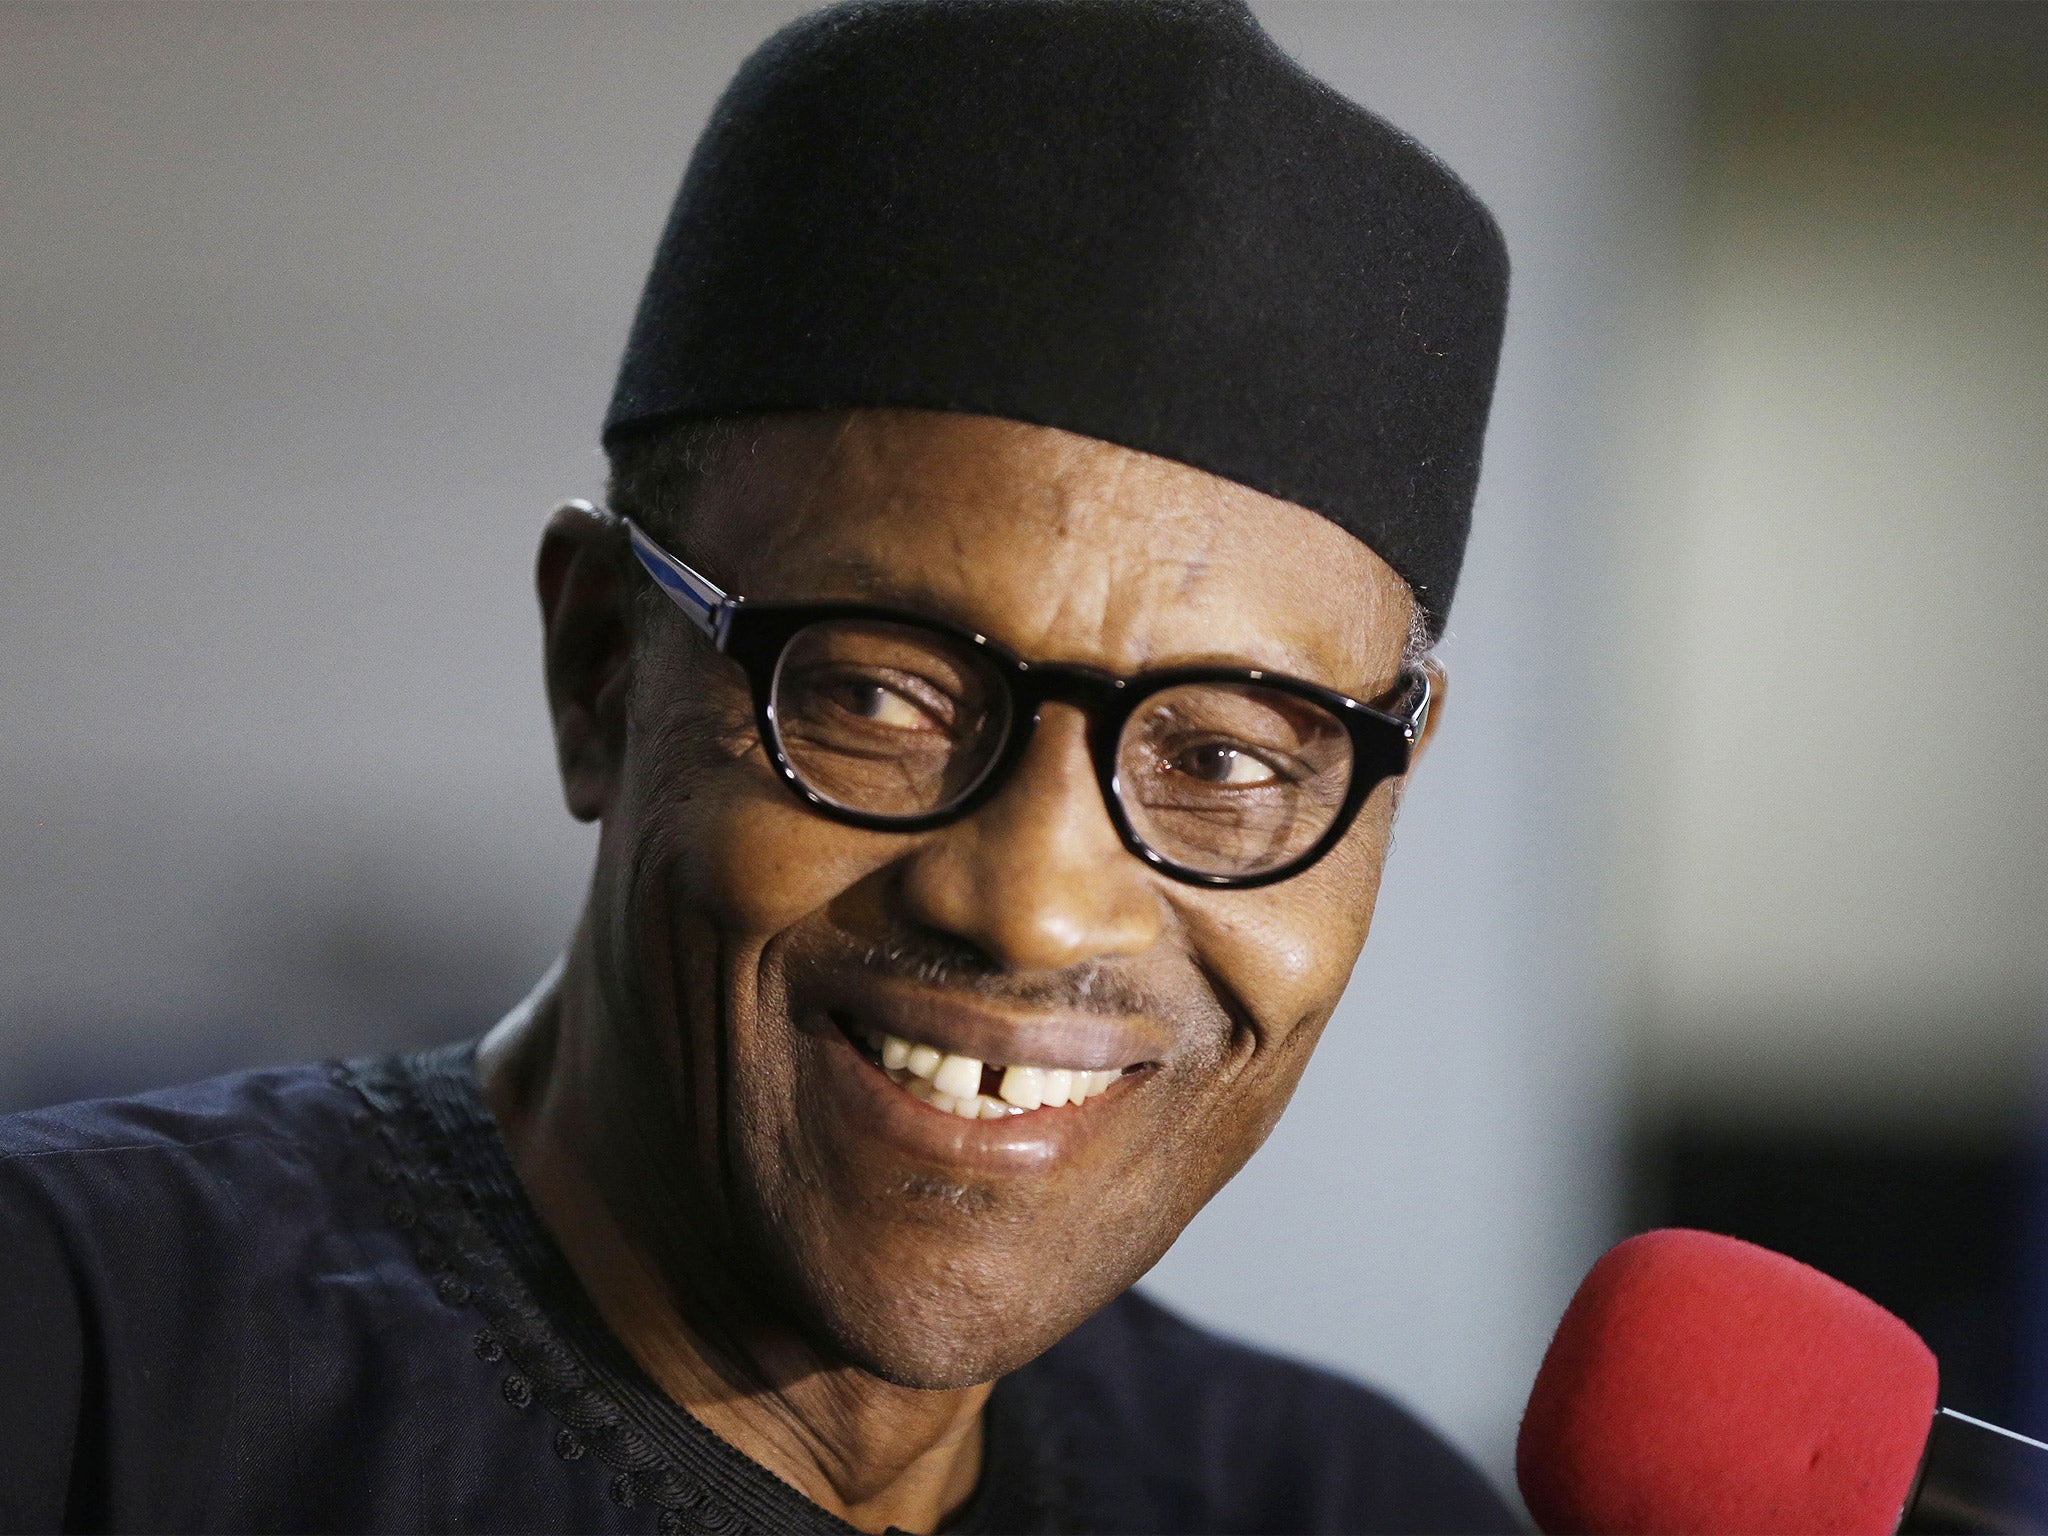 Muhammadu Buhari’s APC party won huge support across a country riven by ethnic divisions